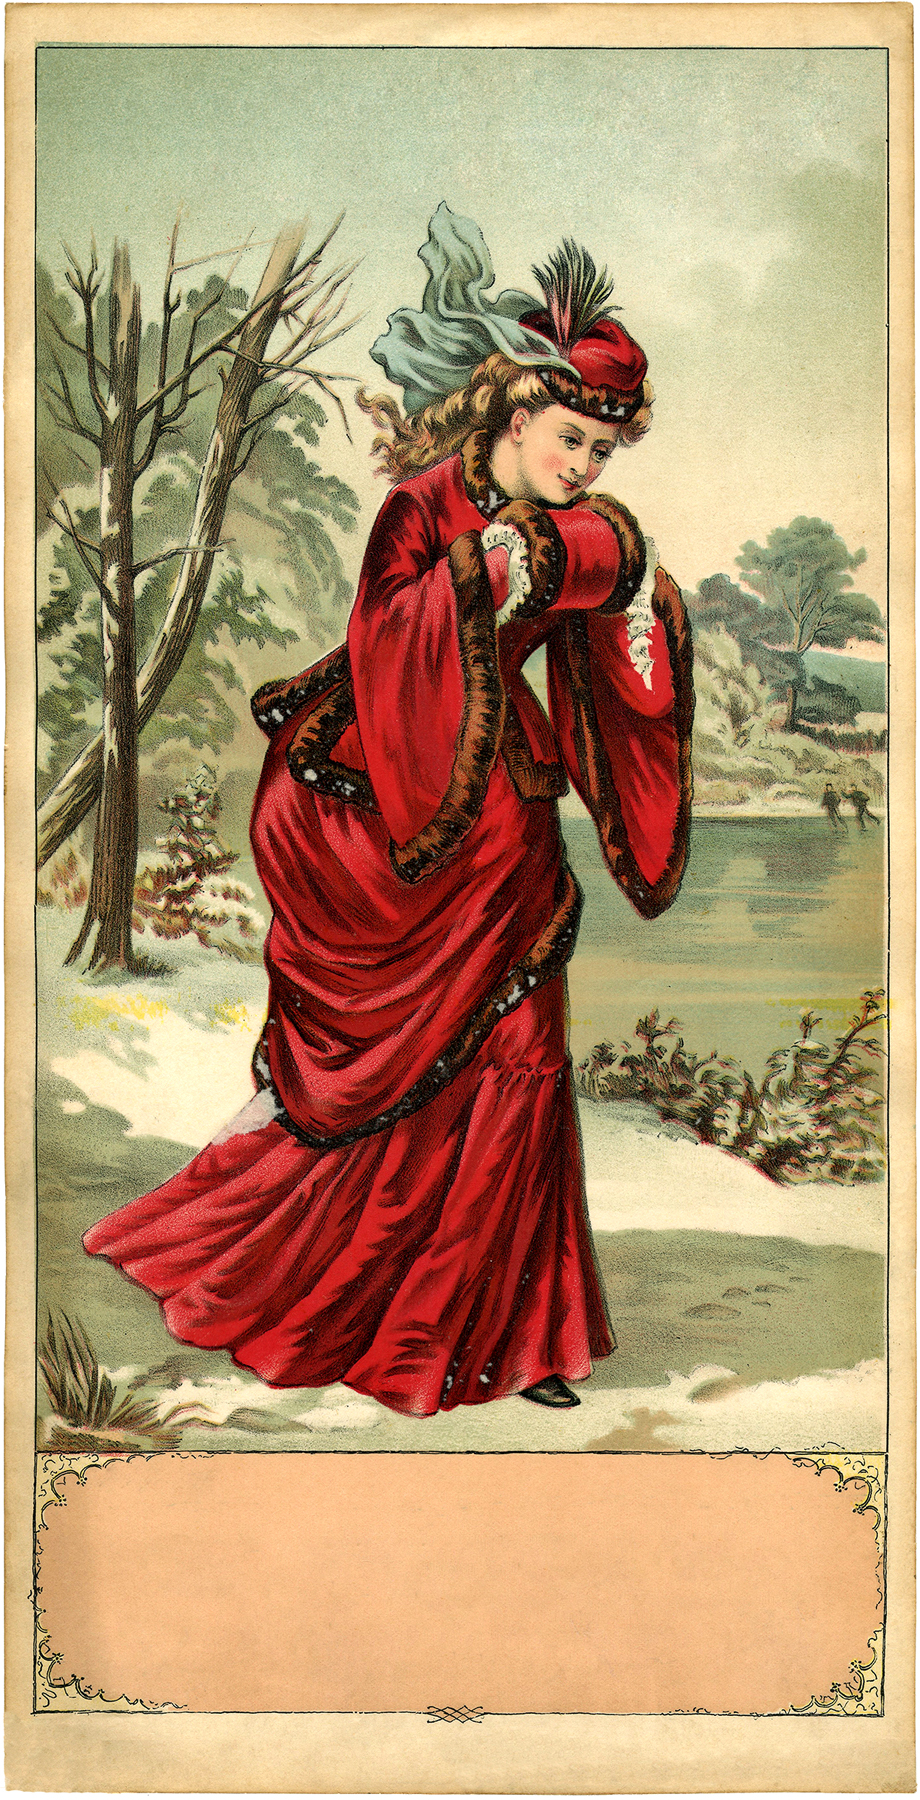 Stunning Victorian Winter Lady Image! - The Graphics Fairy